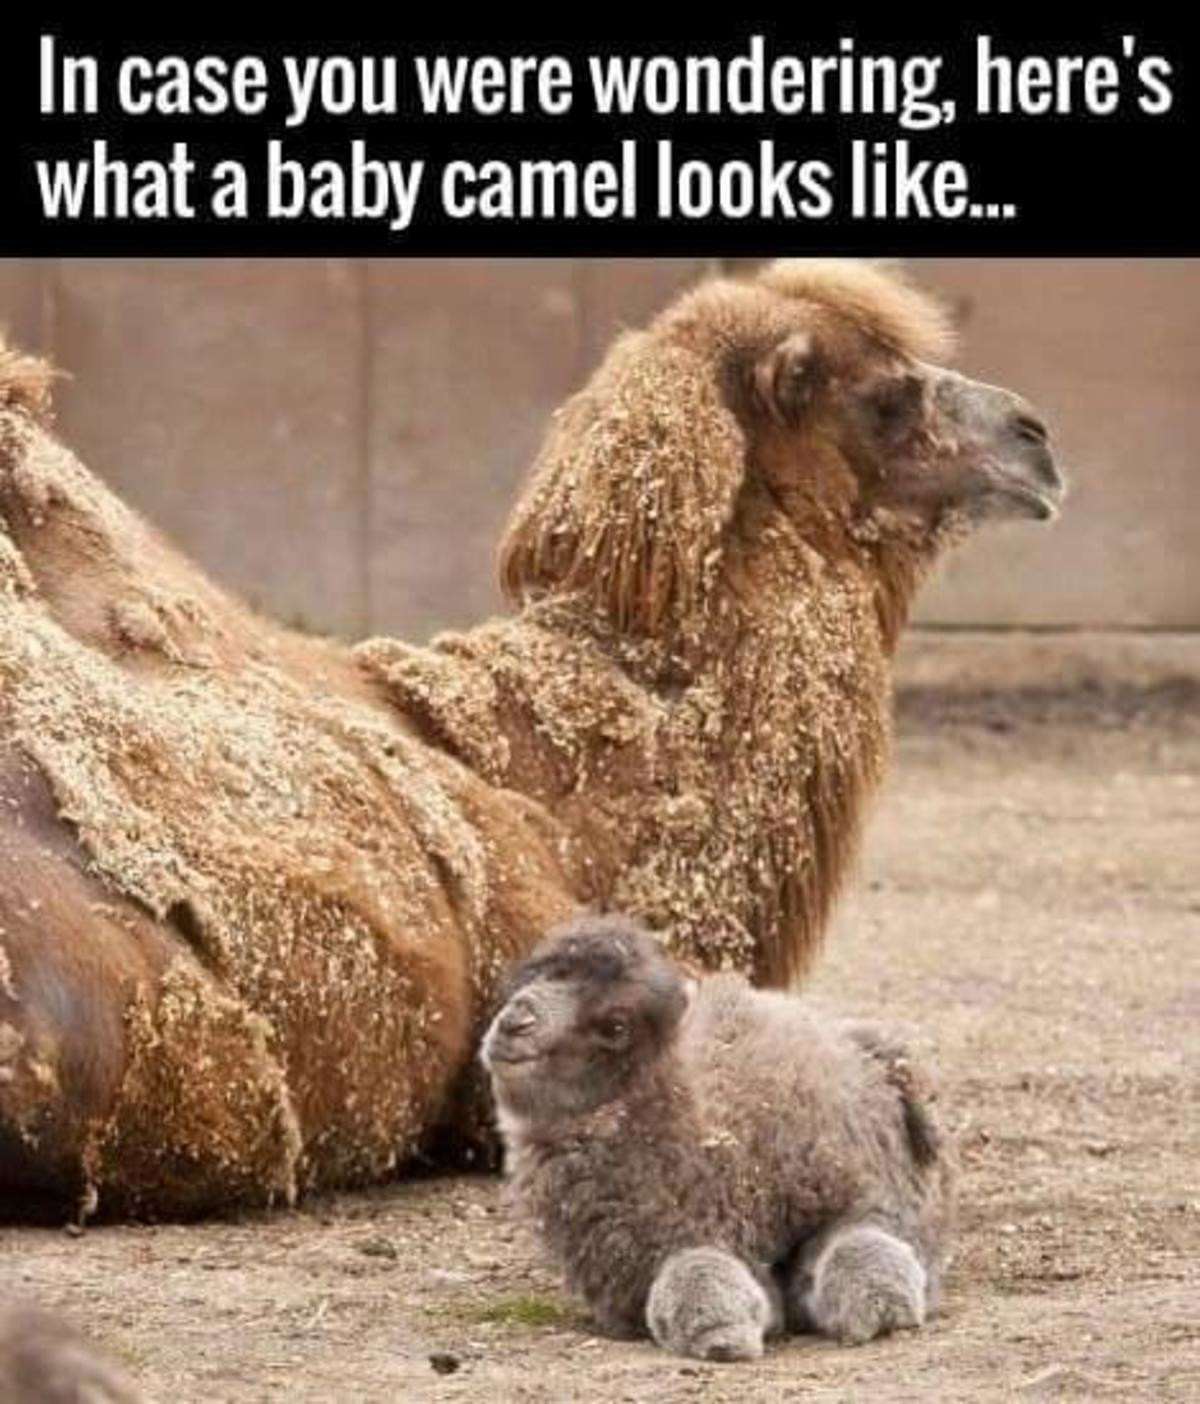 baby camel - In case you were wondering, here's what a baby camel looks ...